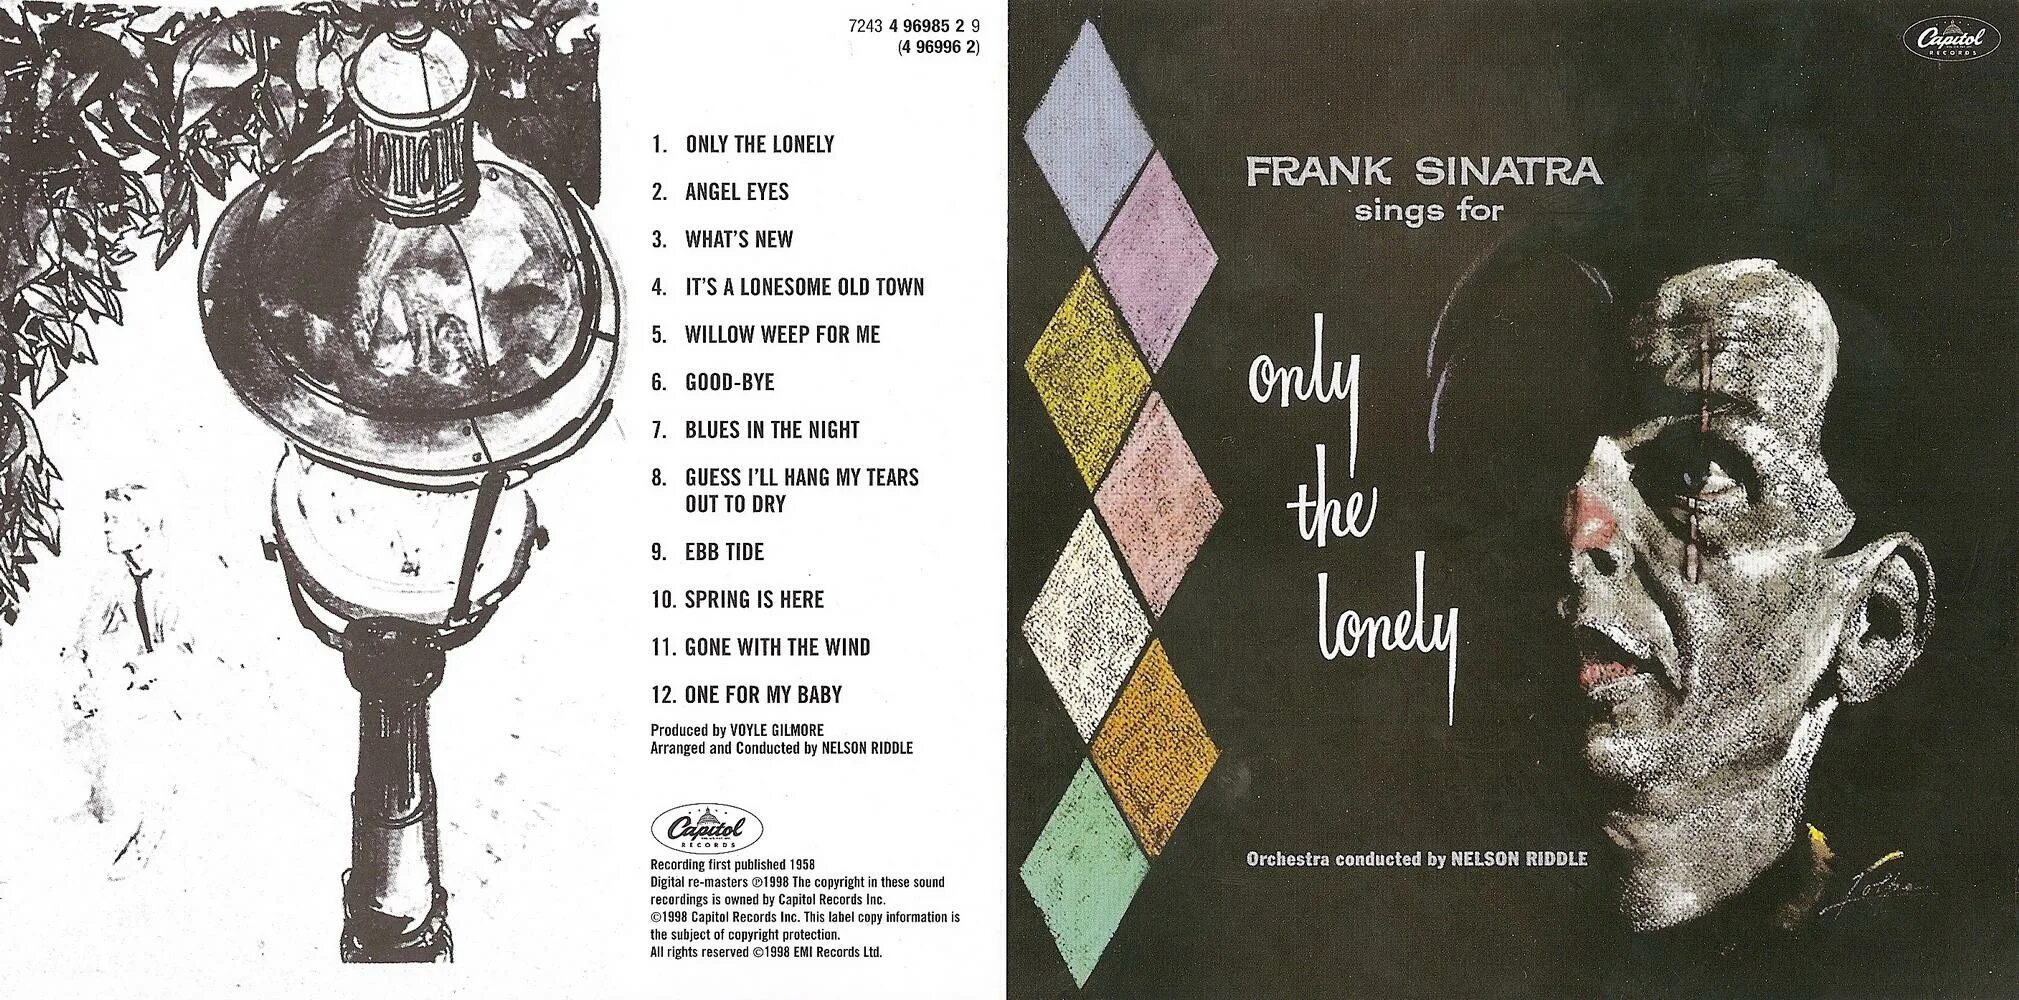 Sinatra Capitol records 1954. Frank Sinatra Sings for only the Lonely 1958. Frank Sinatra - one for my Baby. Frank Sinatra Nelson Riddle. Only the lonely